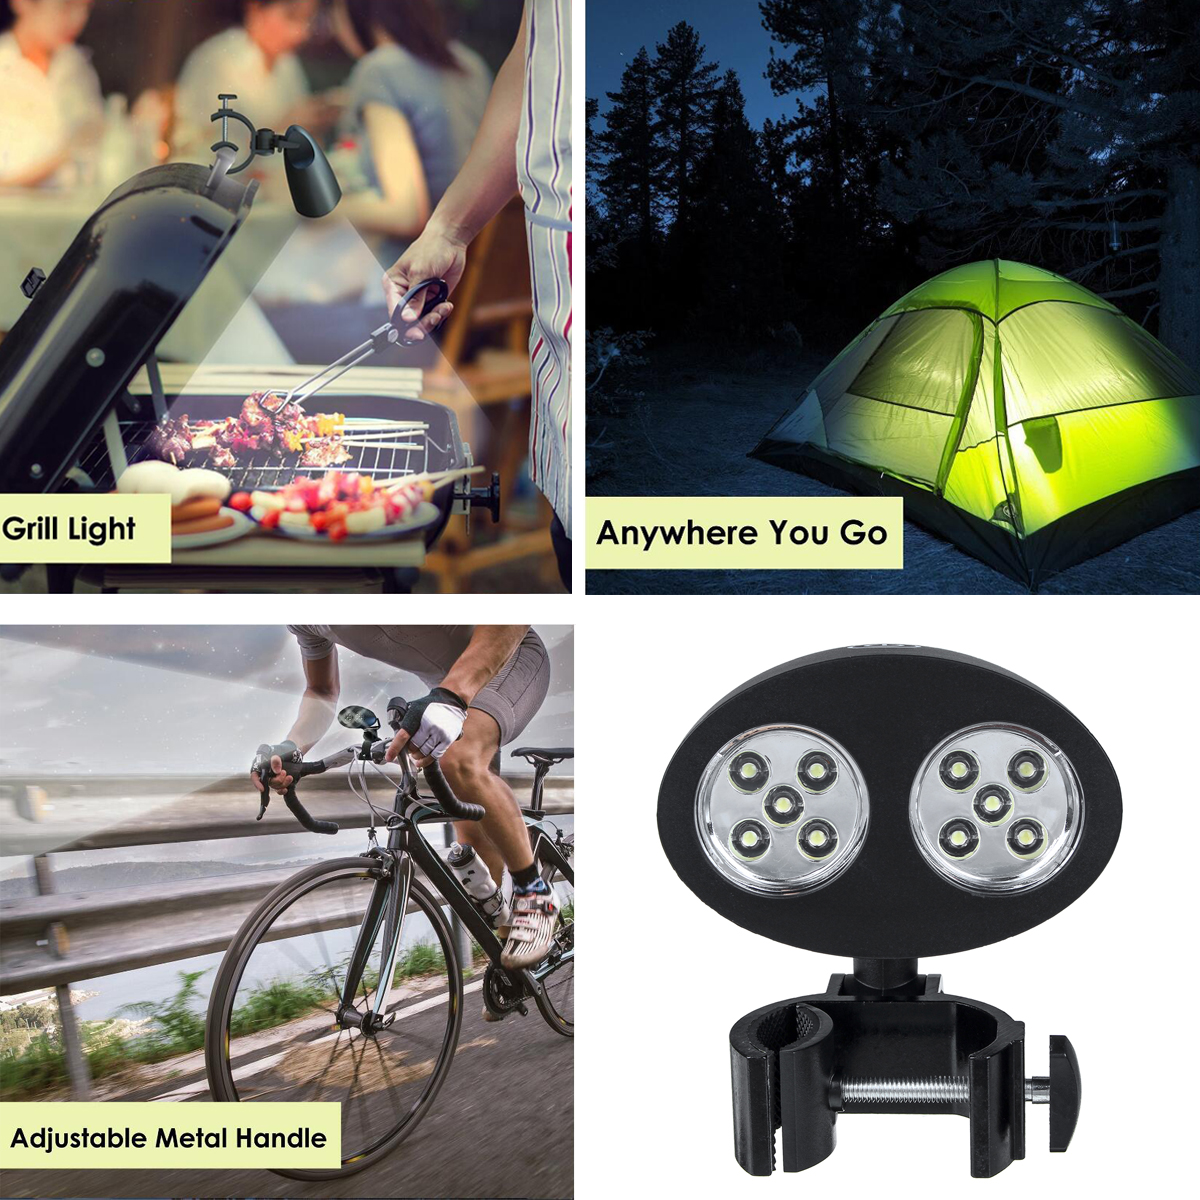 BBQ-Grill-Light-Camping-Picnic-Durable-Super-Bright-10-Led-Battery-Powered-Barbecue-Lamp-1613019-6